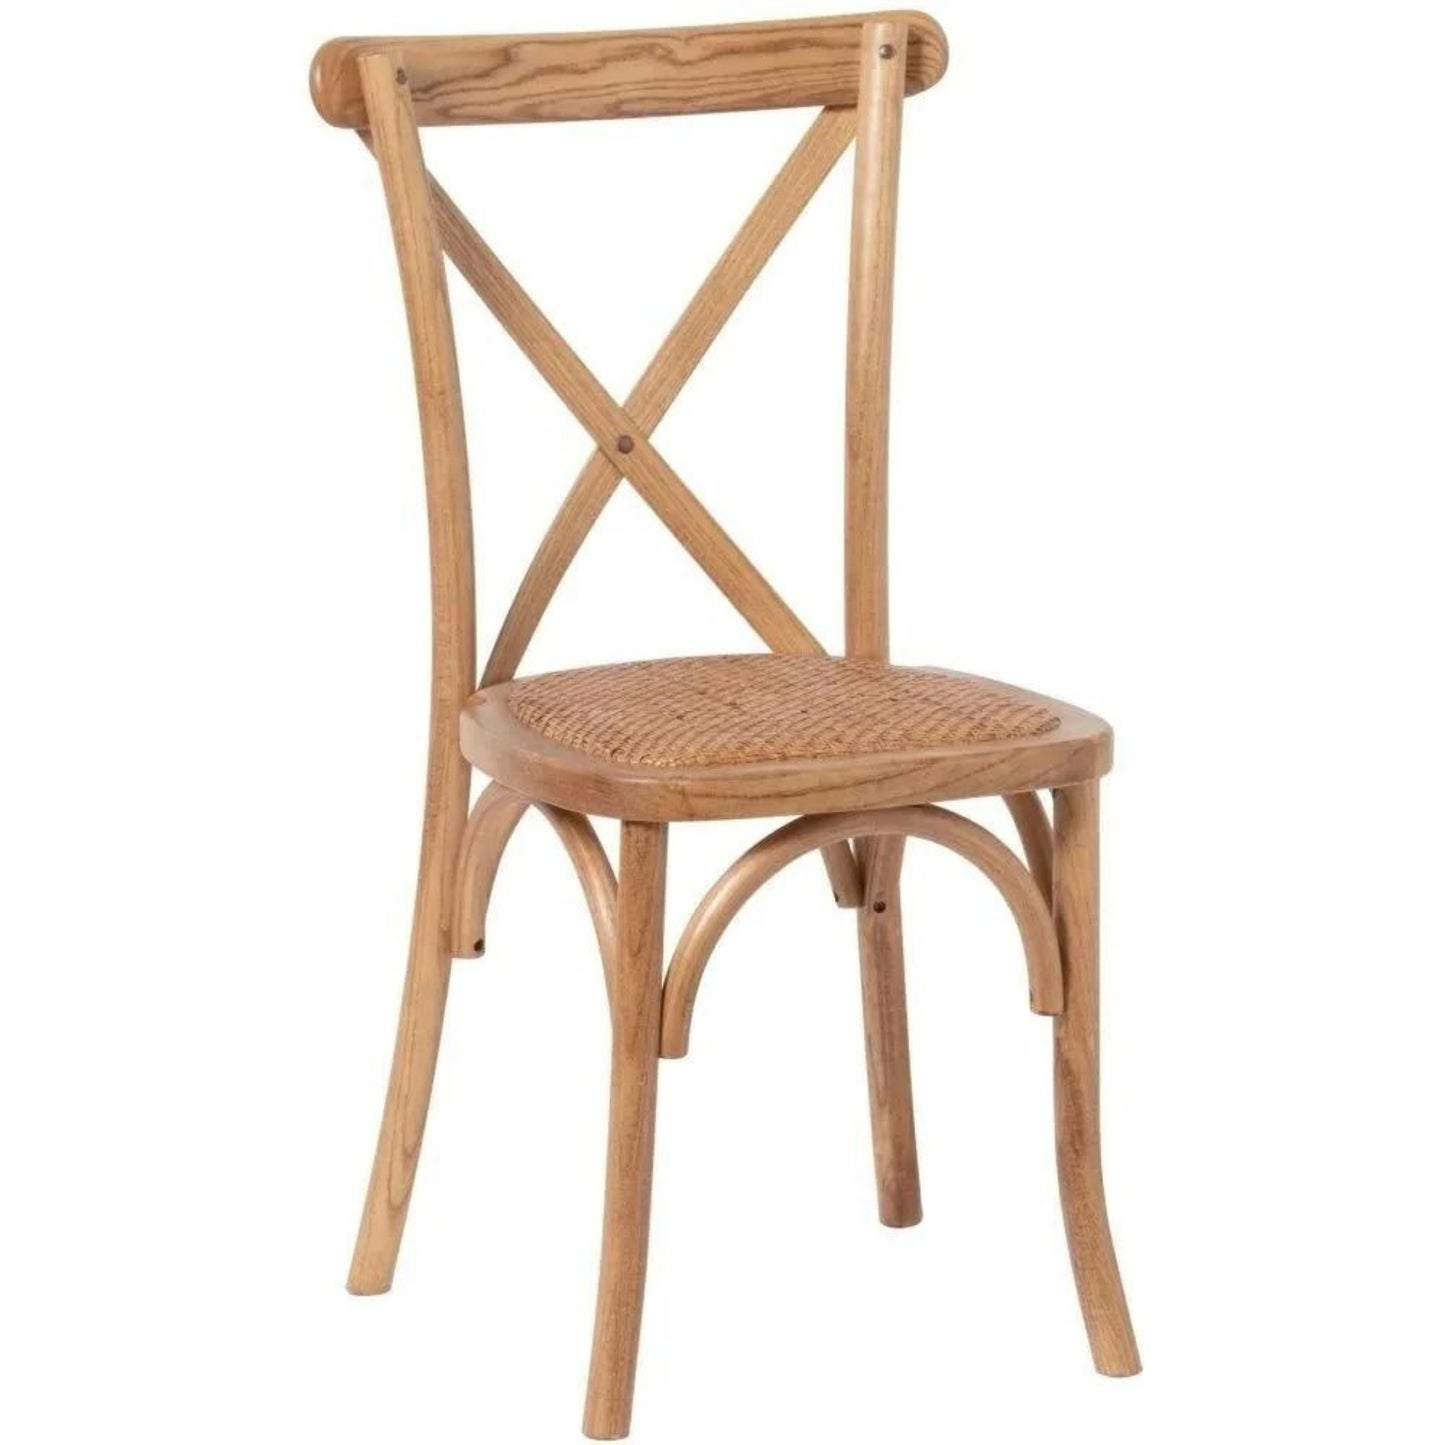 Light Oak Dining Chair with Cross Back